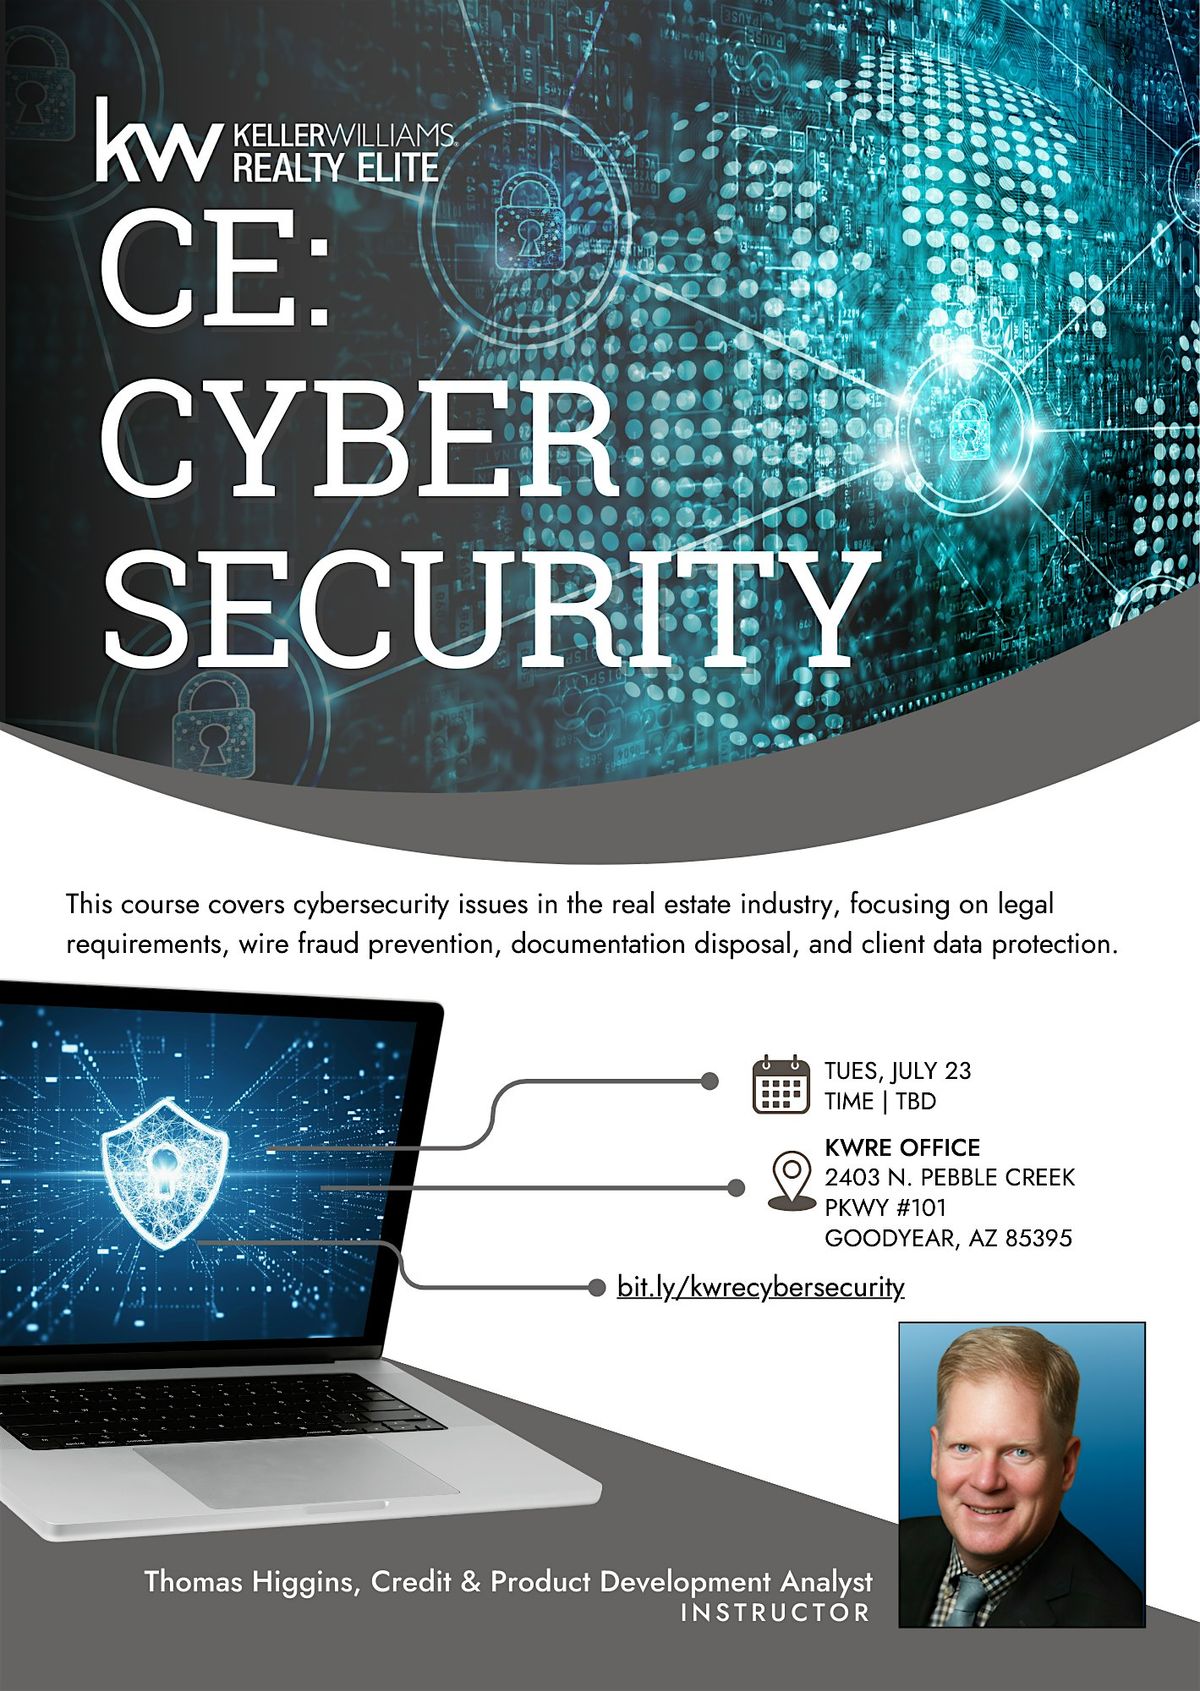 CyberSecurity For Real Estate Professionals